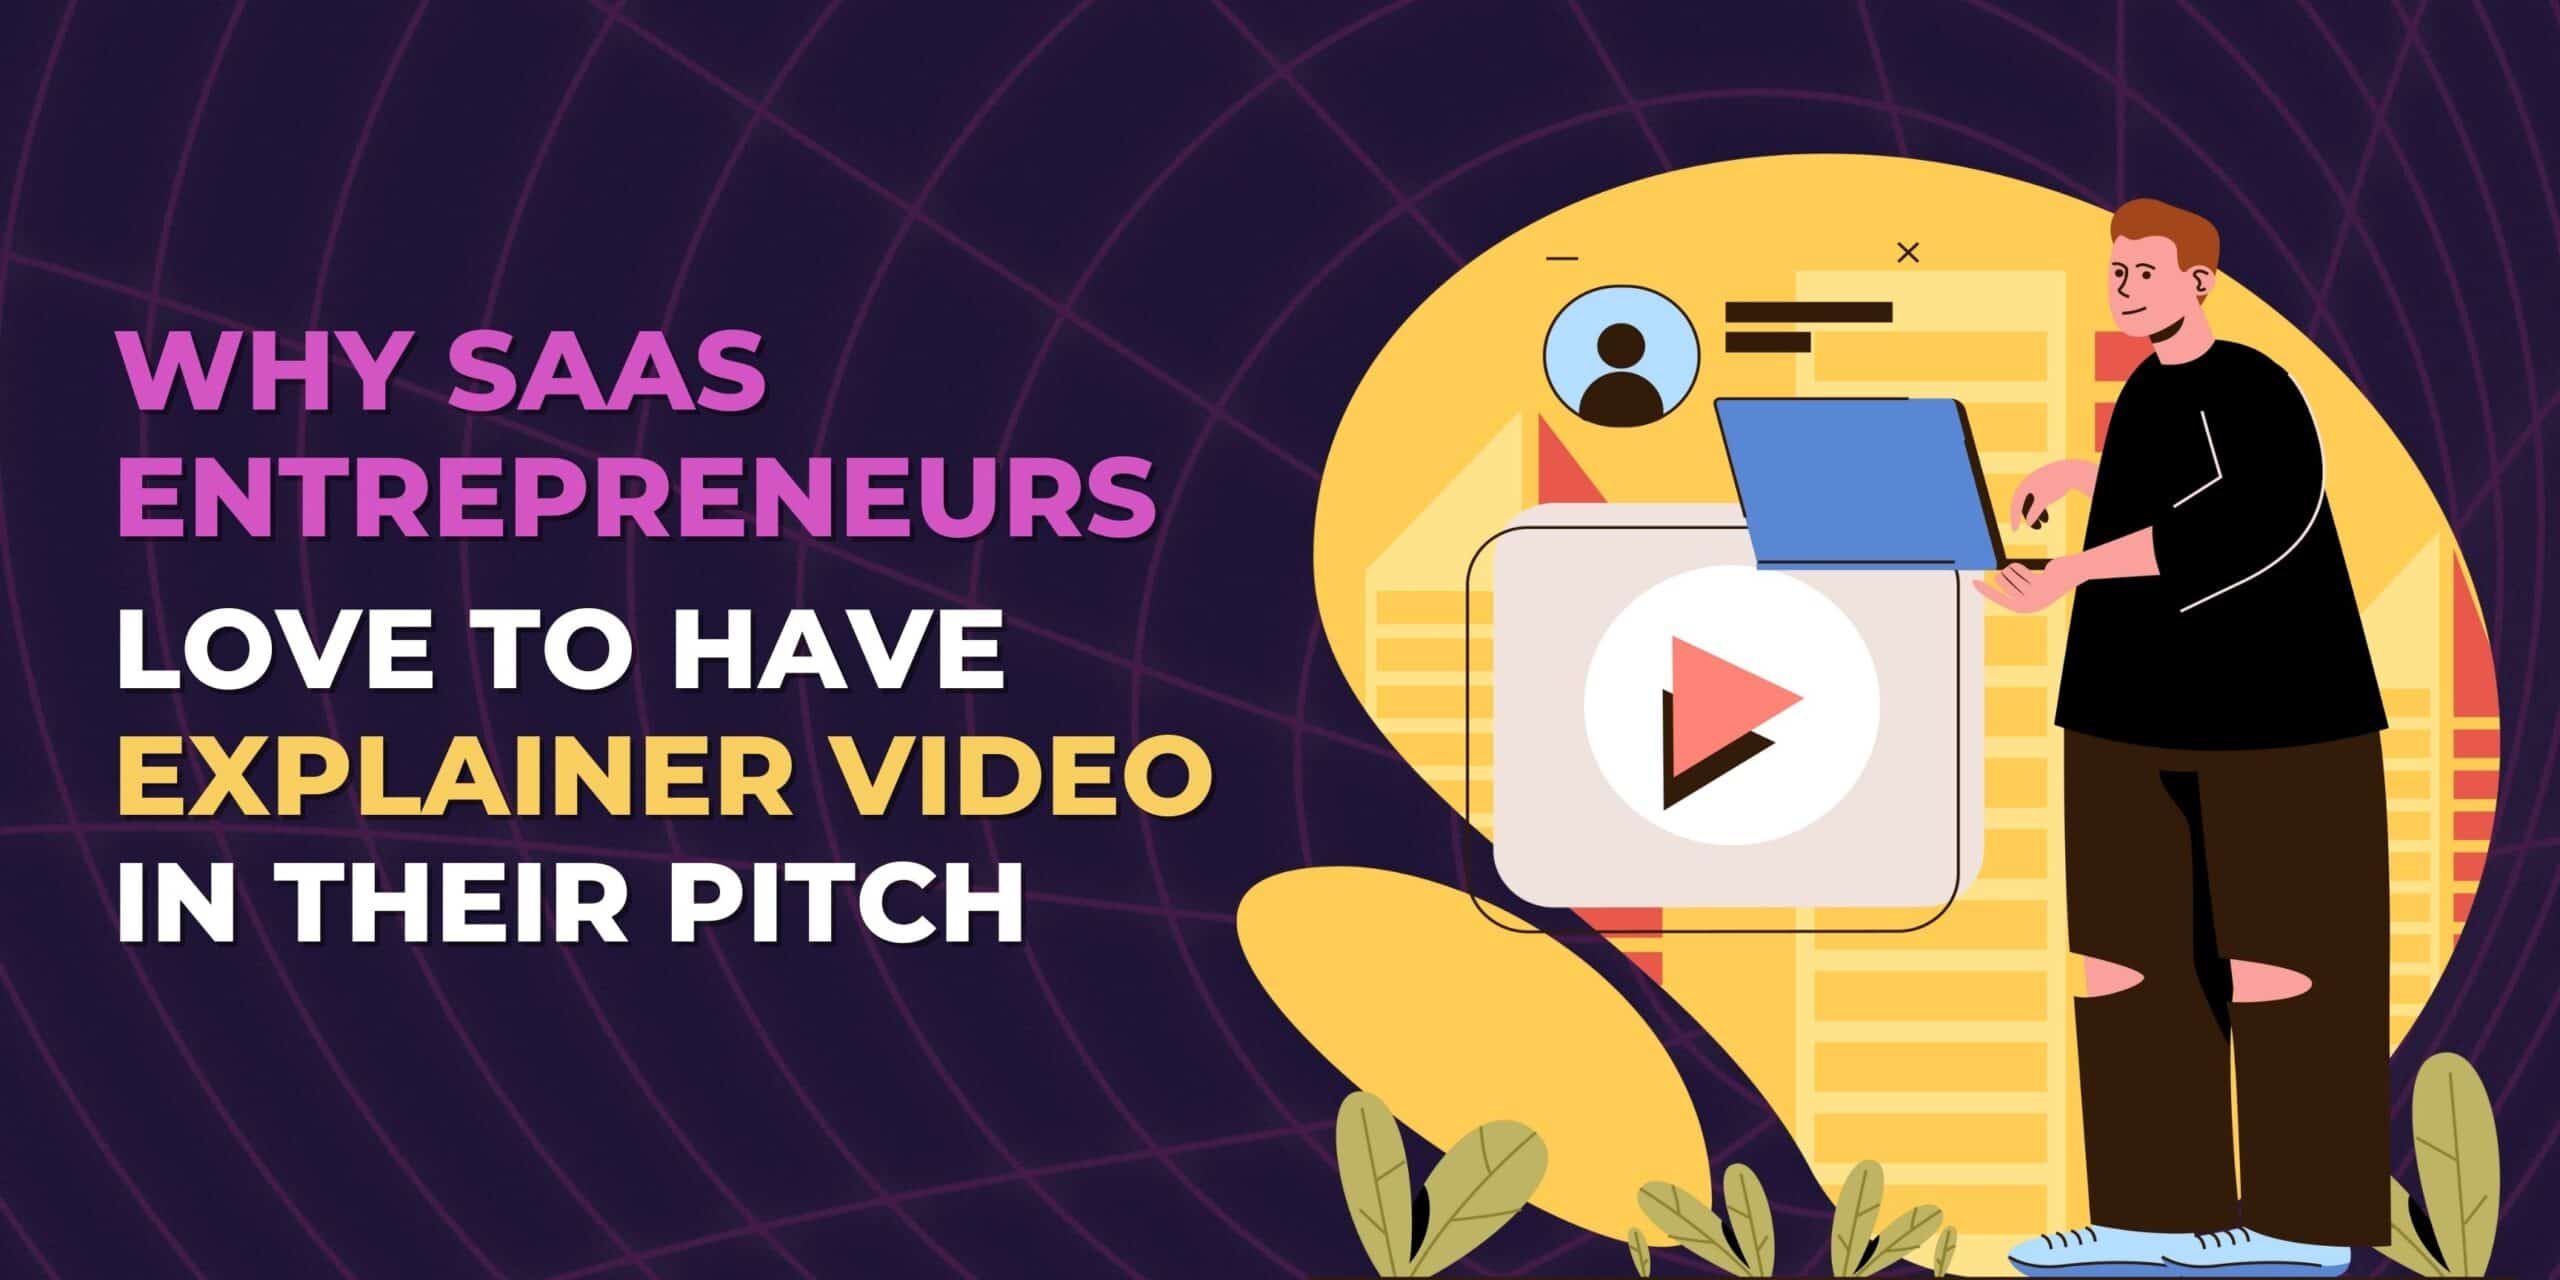 Why SaaS entrepreneurs love explainer video scaled